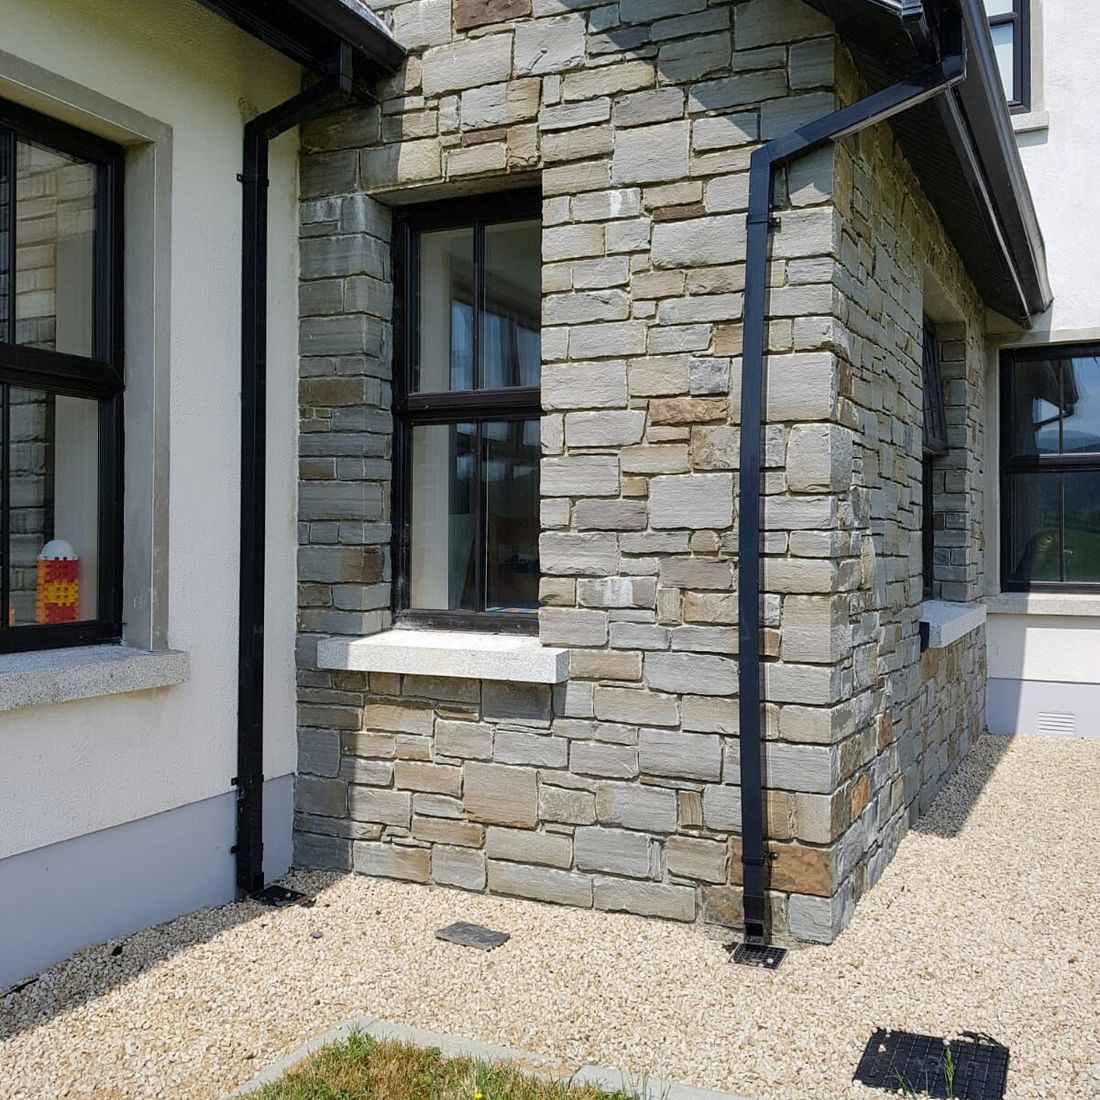 Grey sandstone with dressed corners and shades & tones